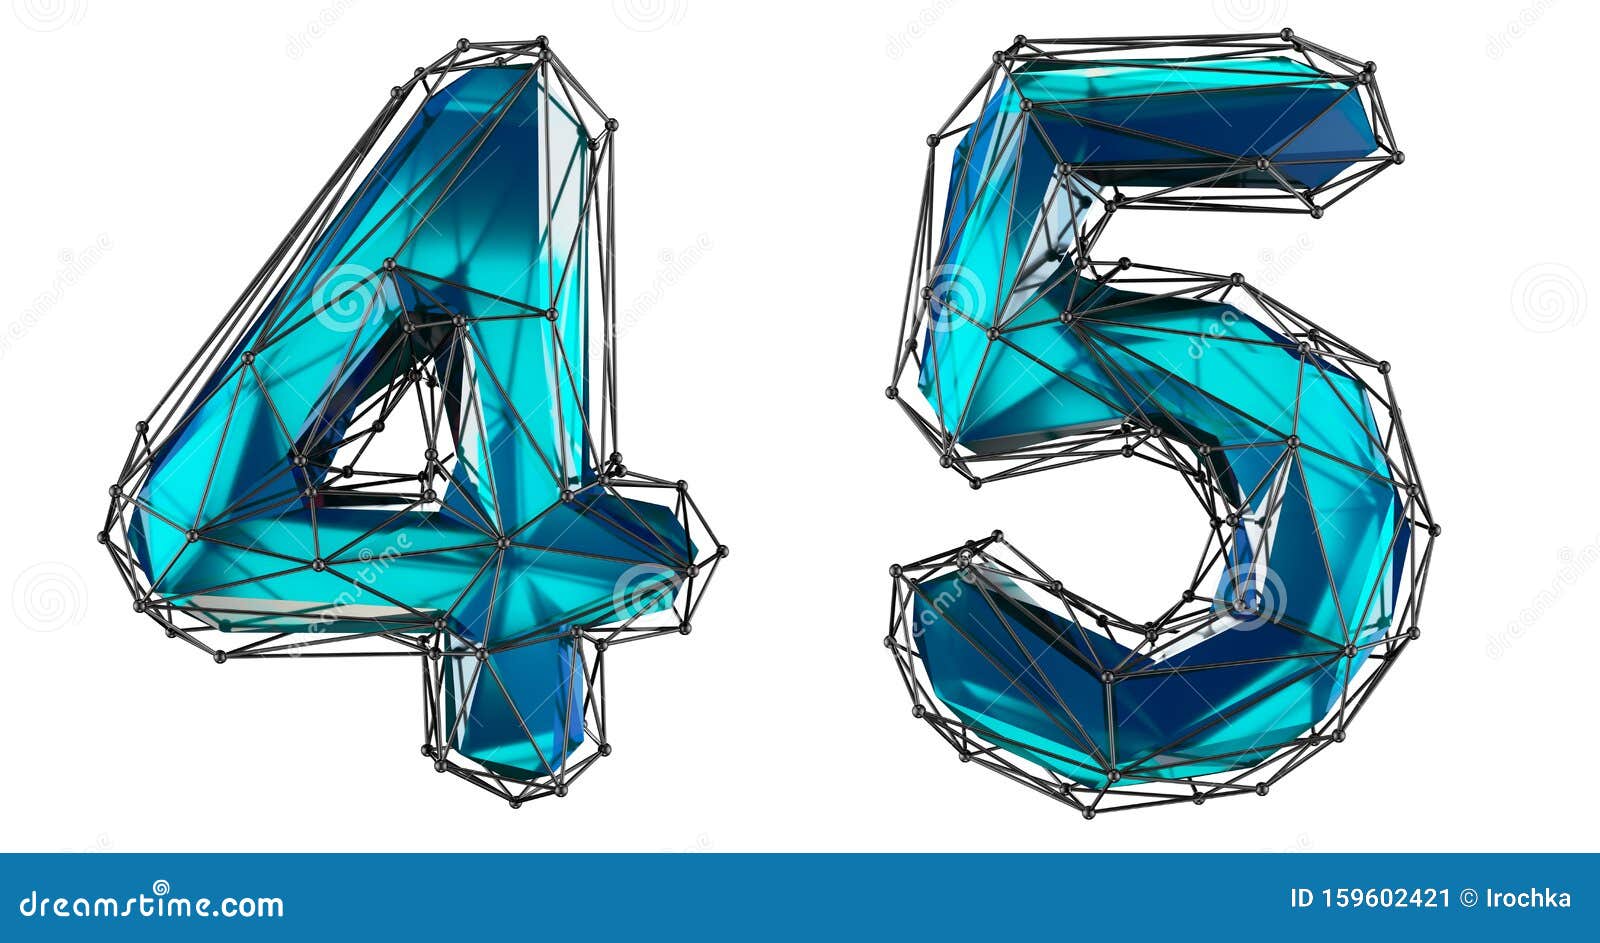 number set 4, 5 made of realistic 3d render blue color. collection of low polly style 